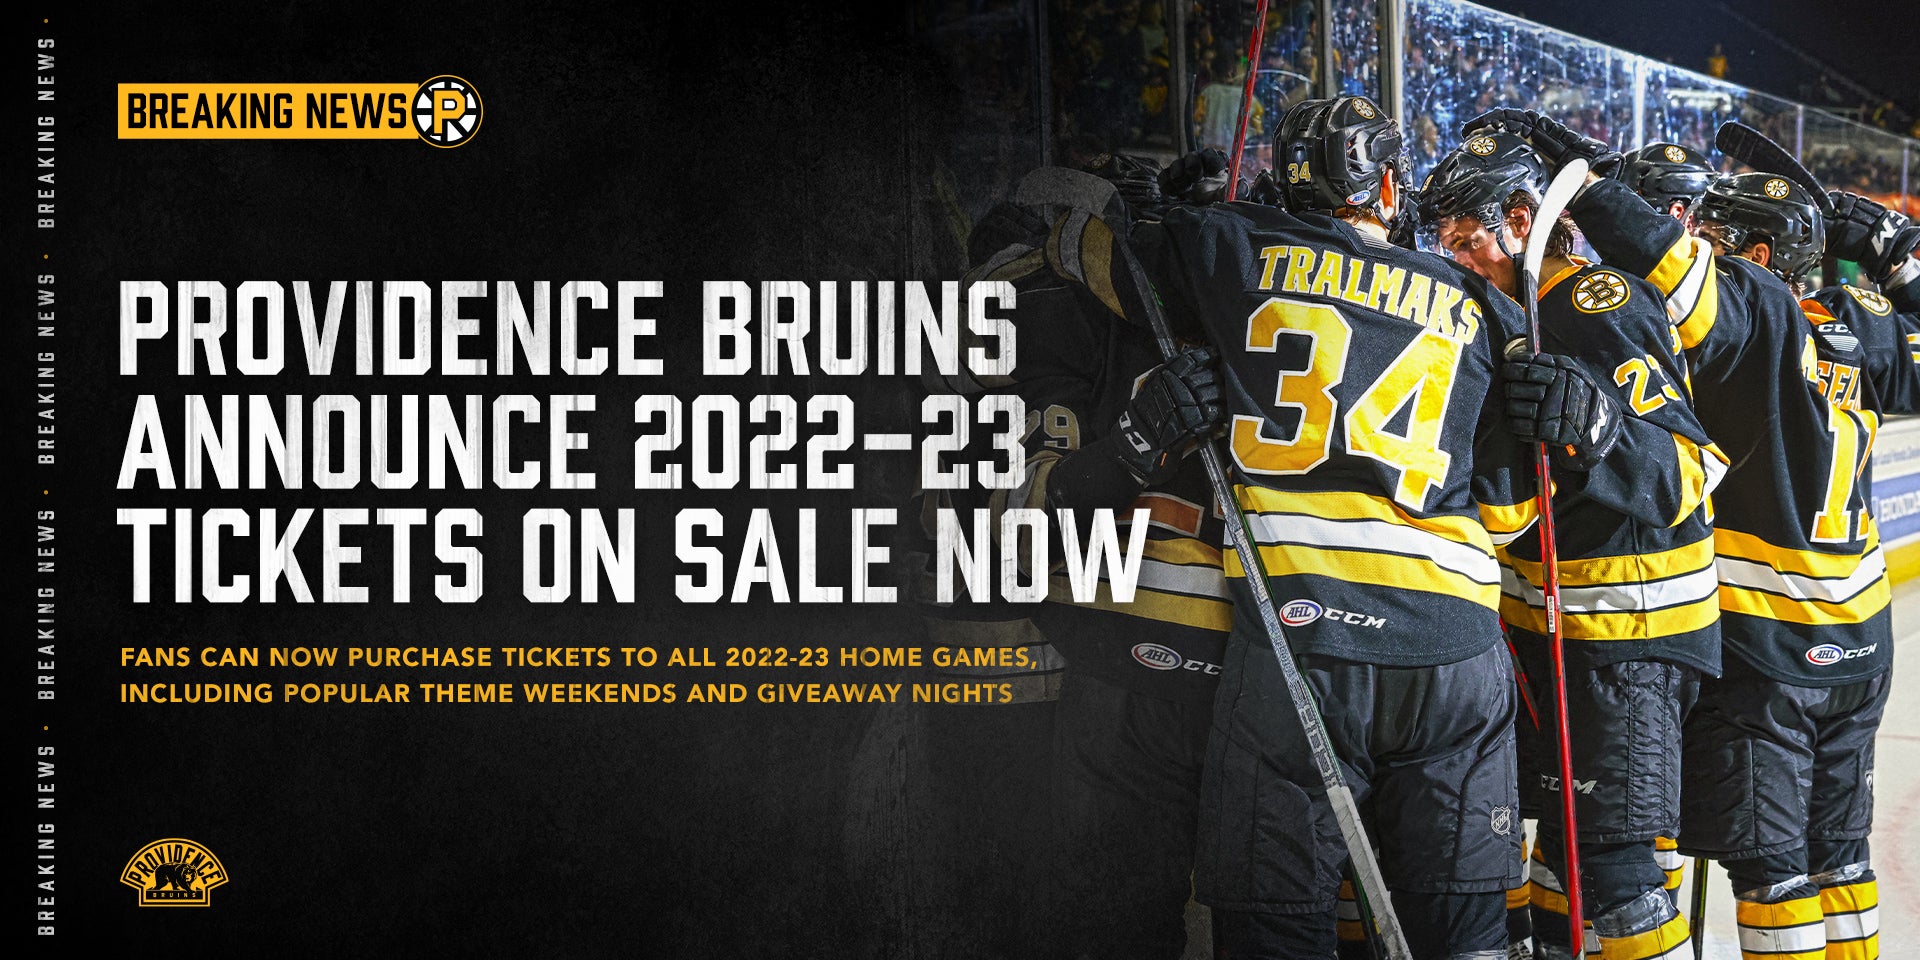 Boston Bruins on X: Purchase your tickets for a chance to win a